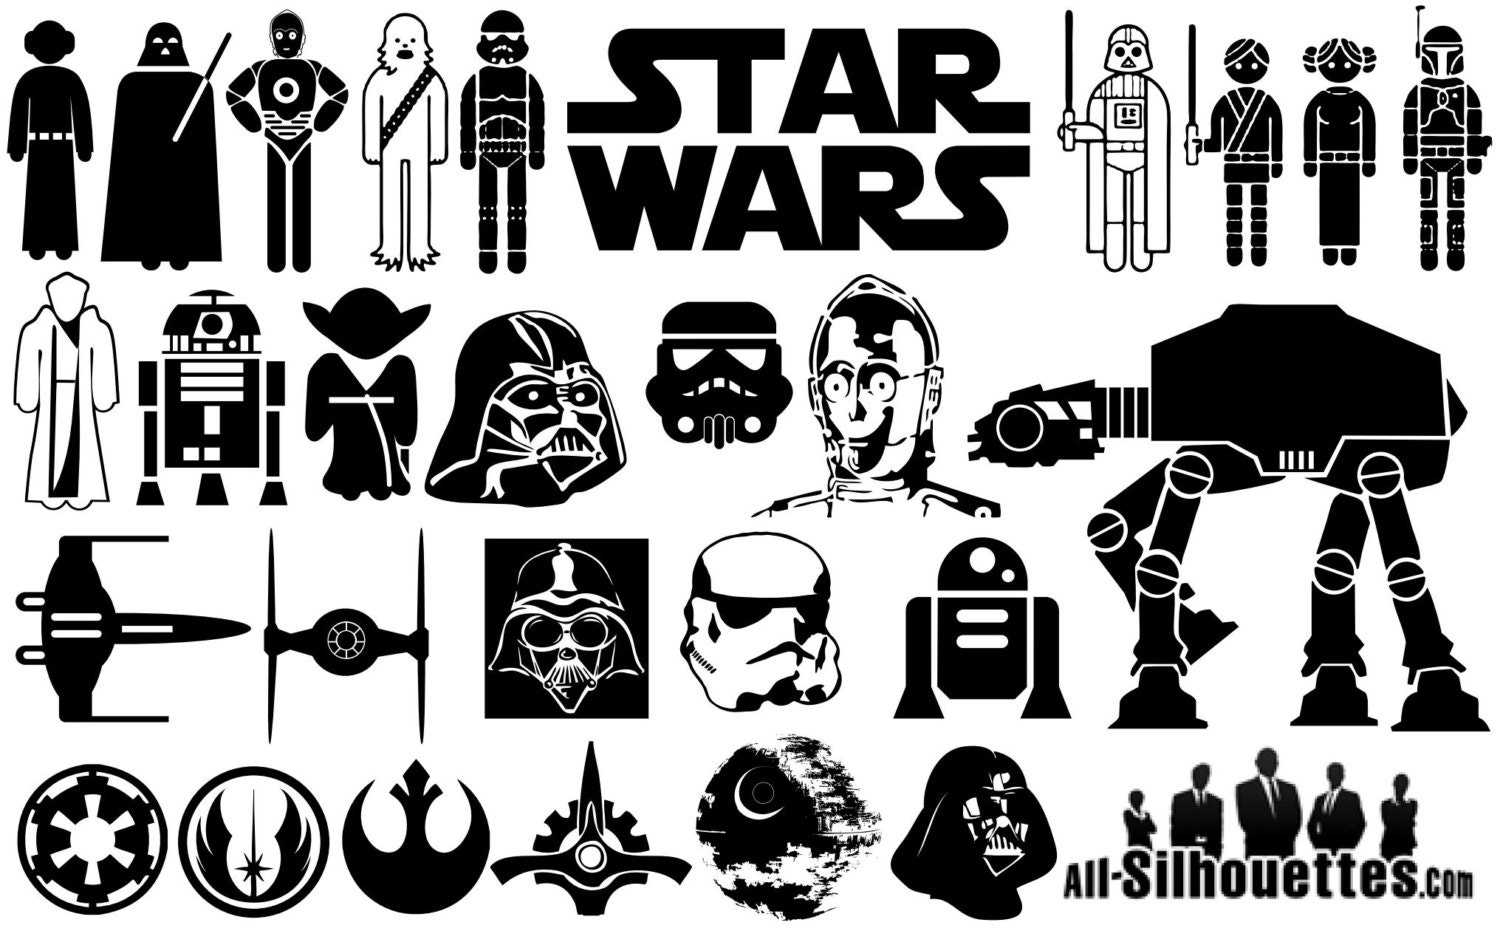 Download Star Wars Silhouettes Pack Silhouette SVG Cut Files Instant